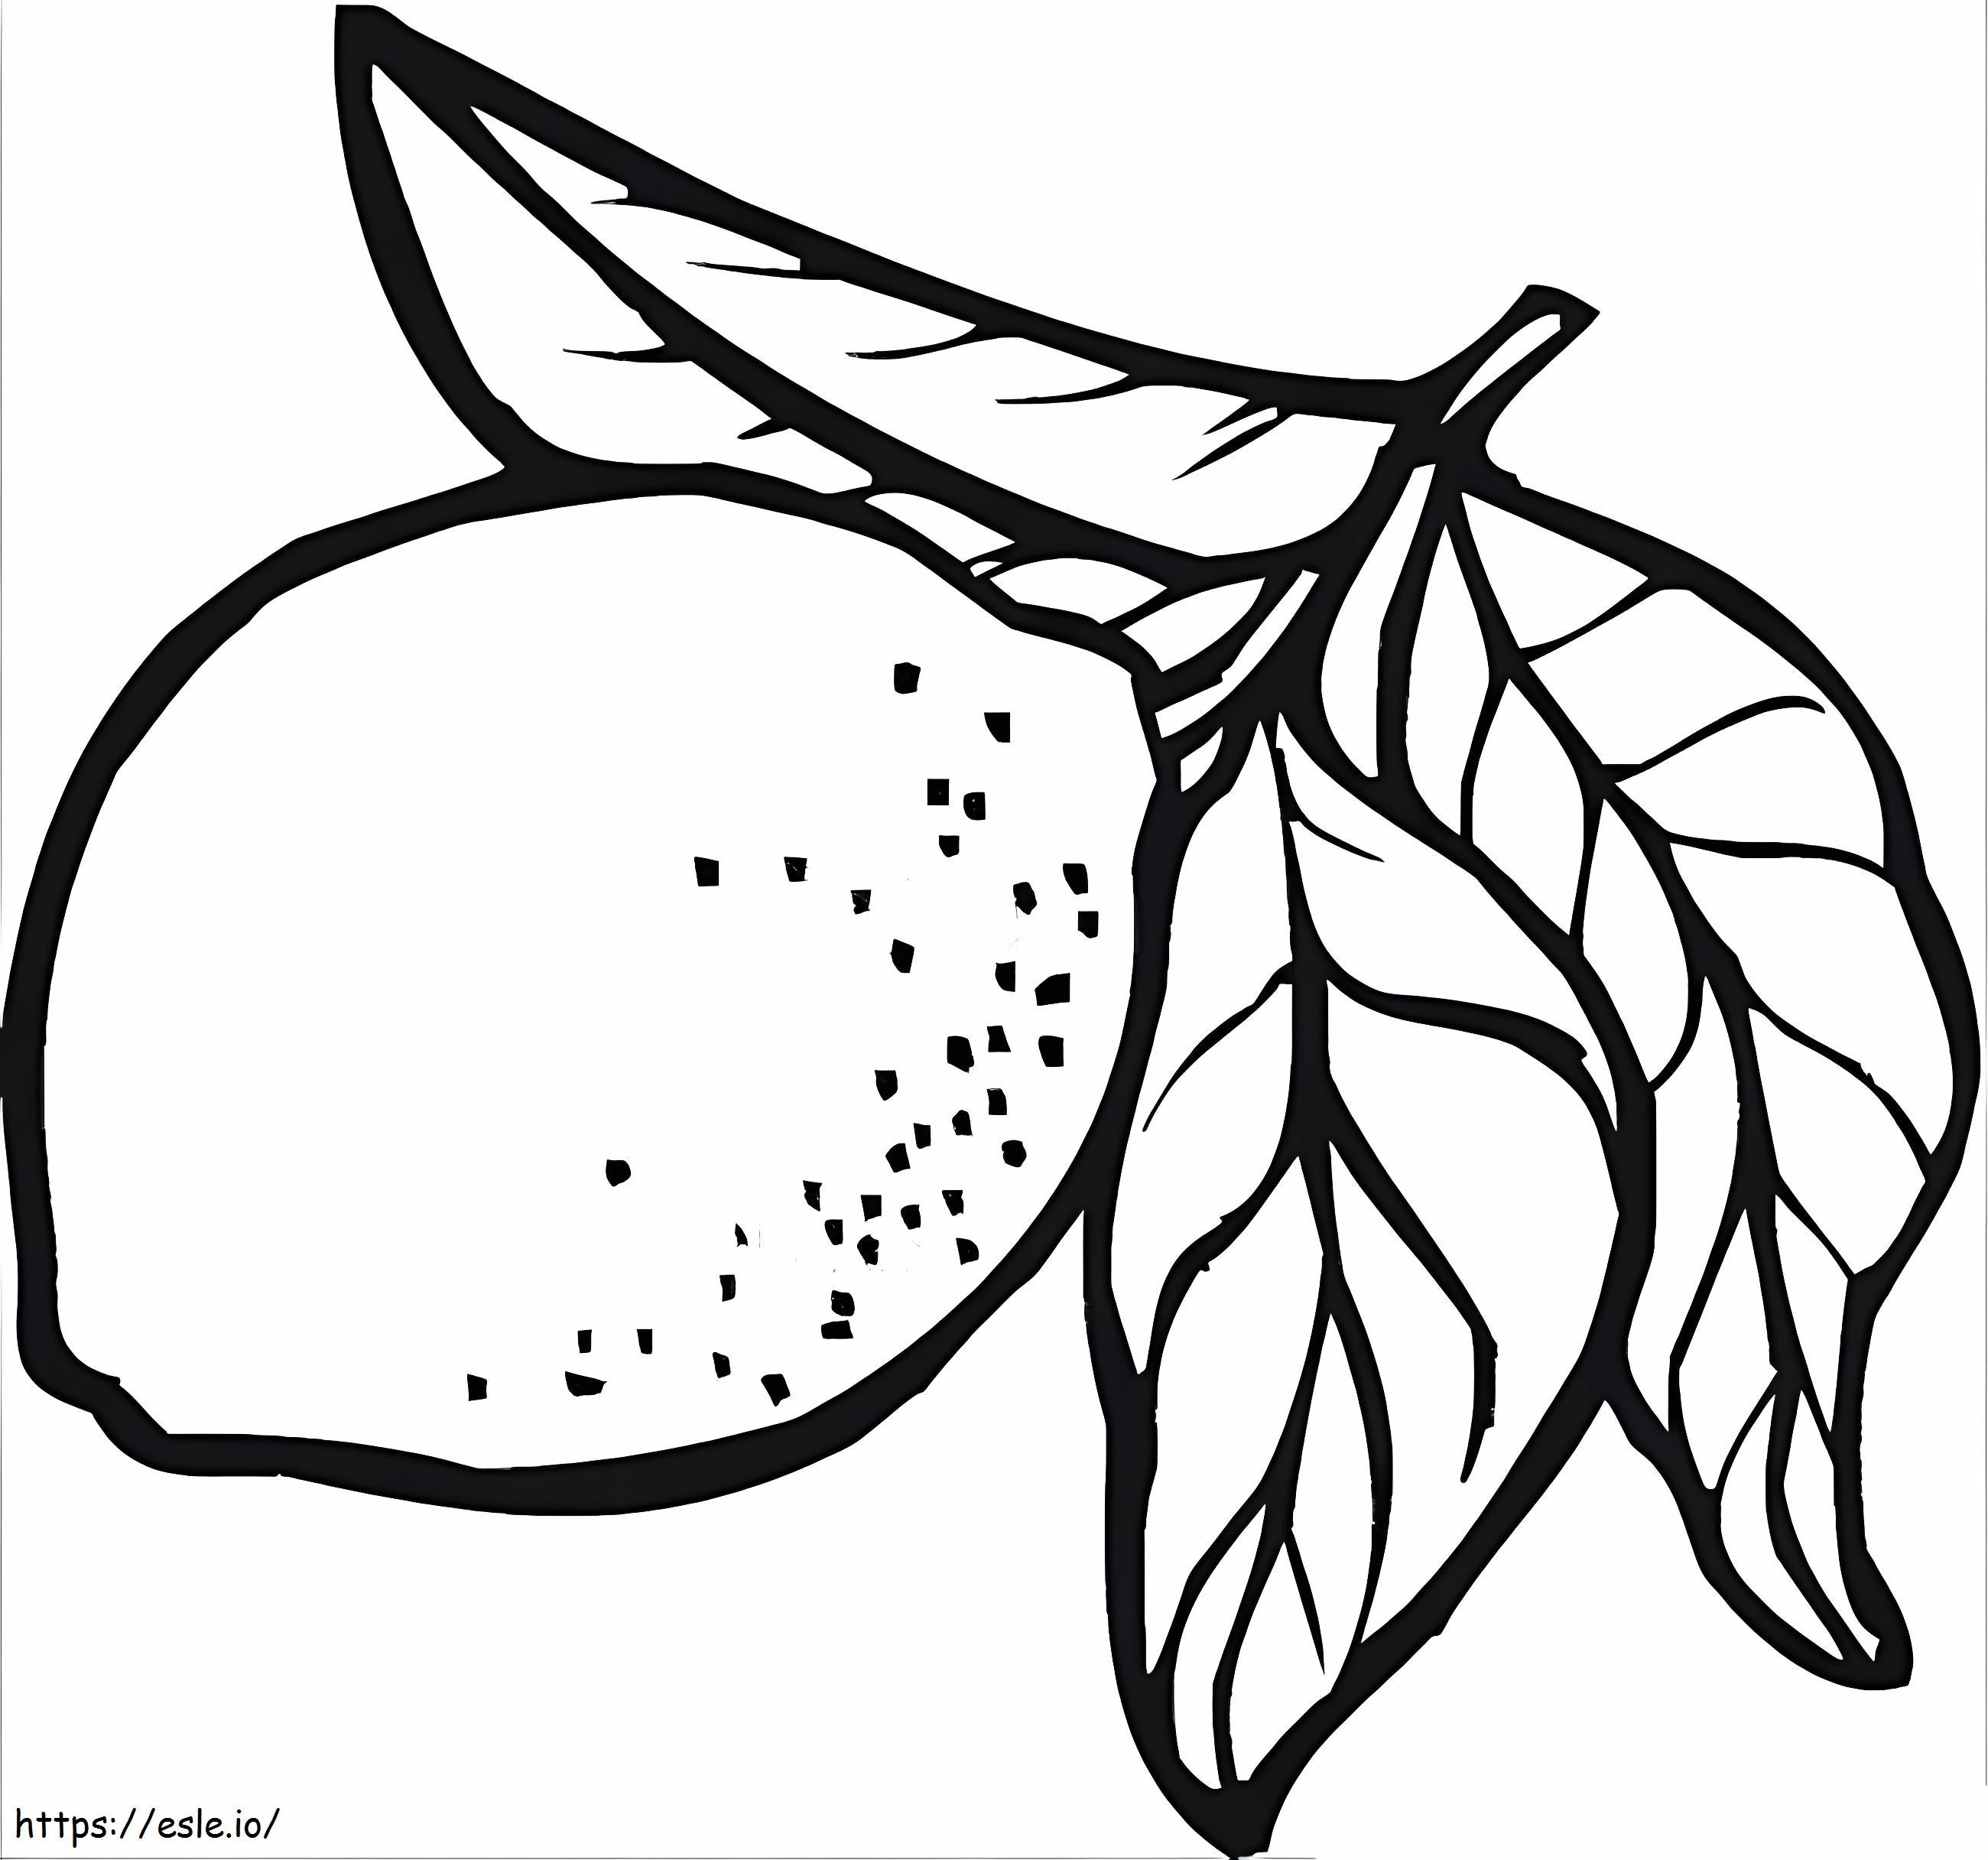 Lemon With Leaf coloring page